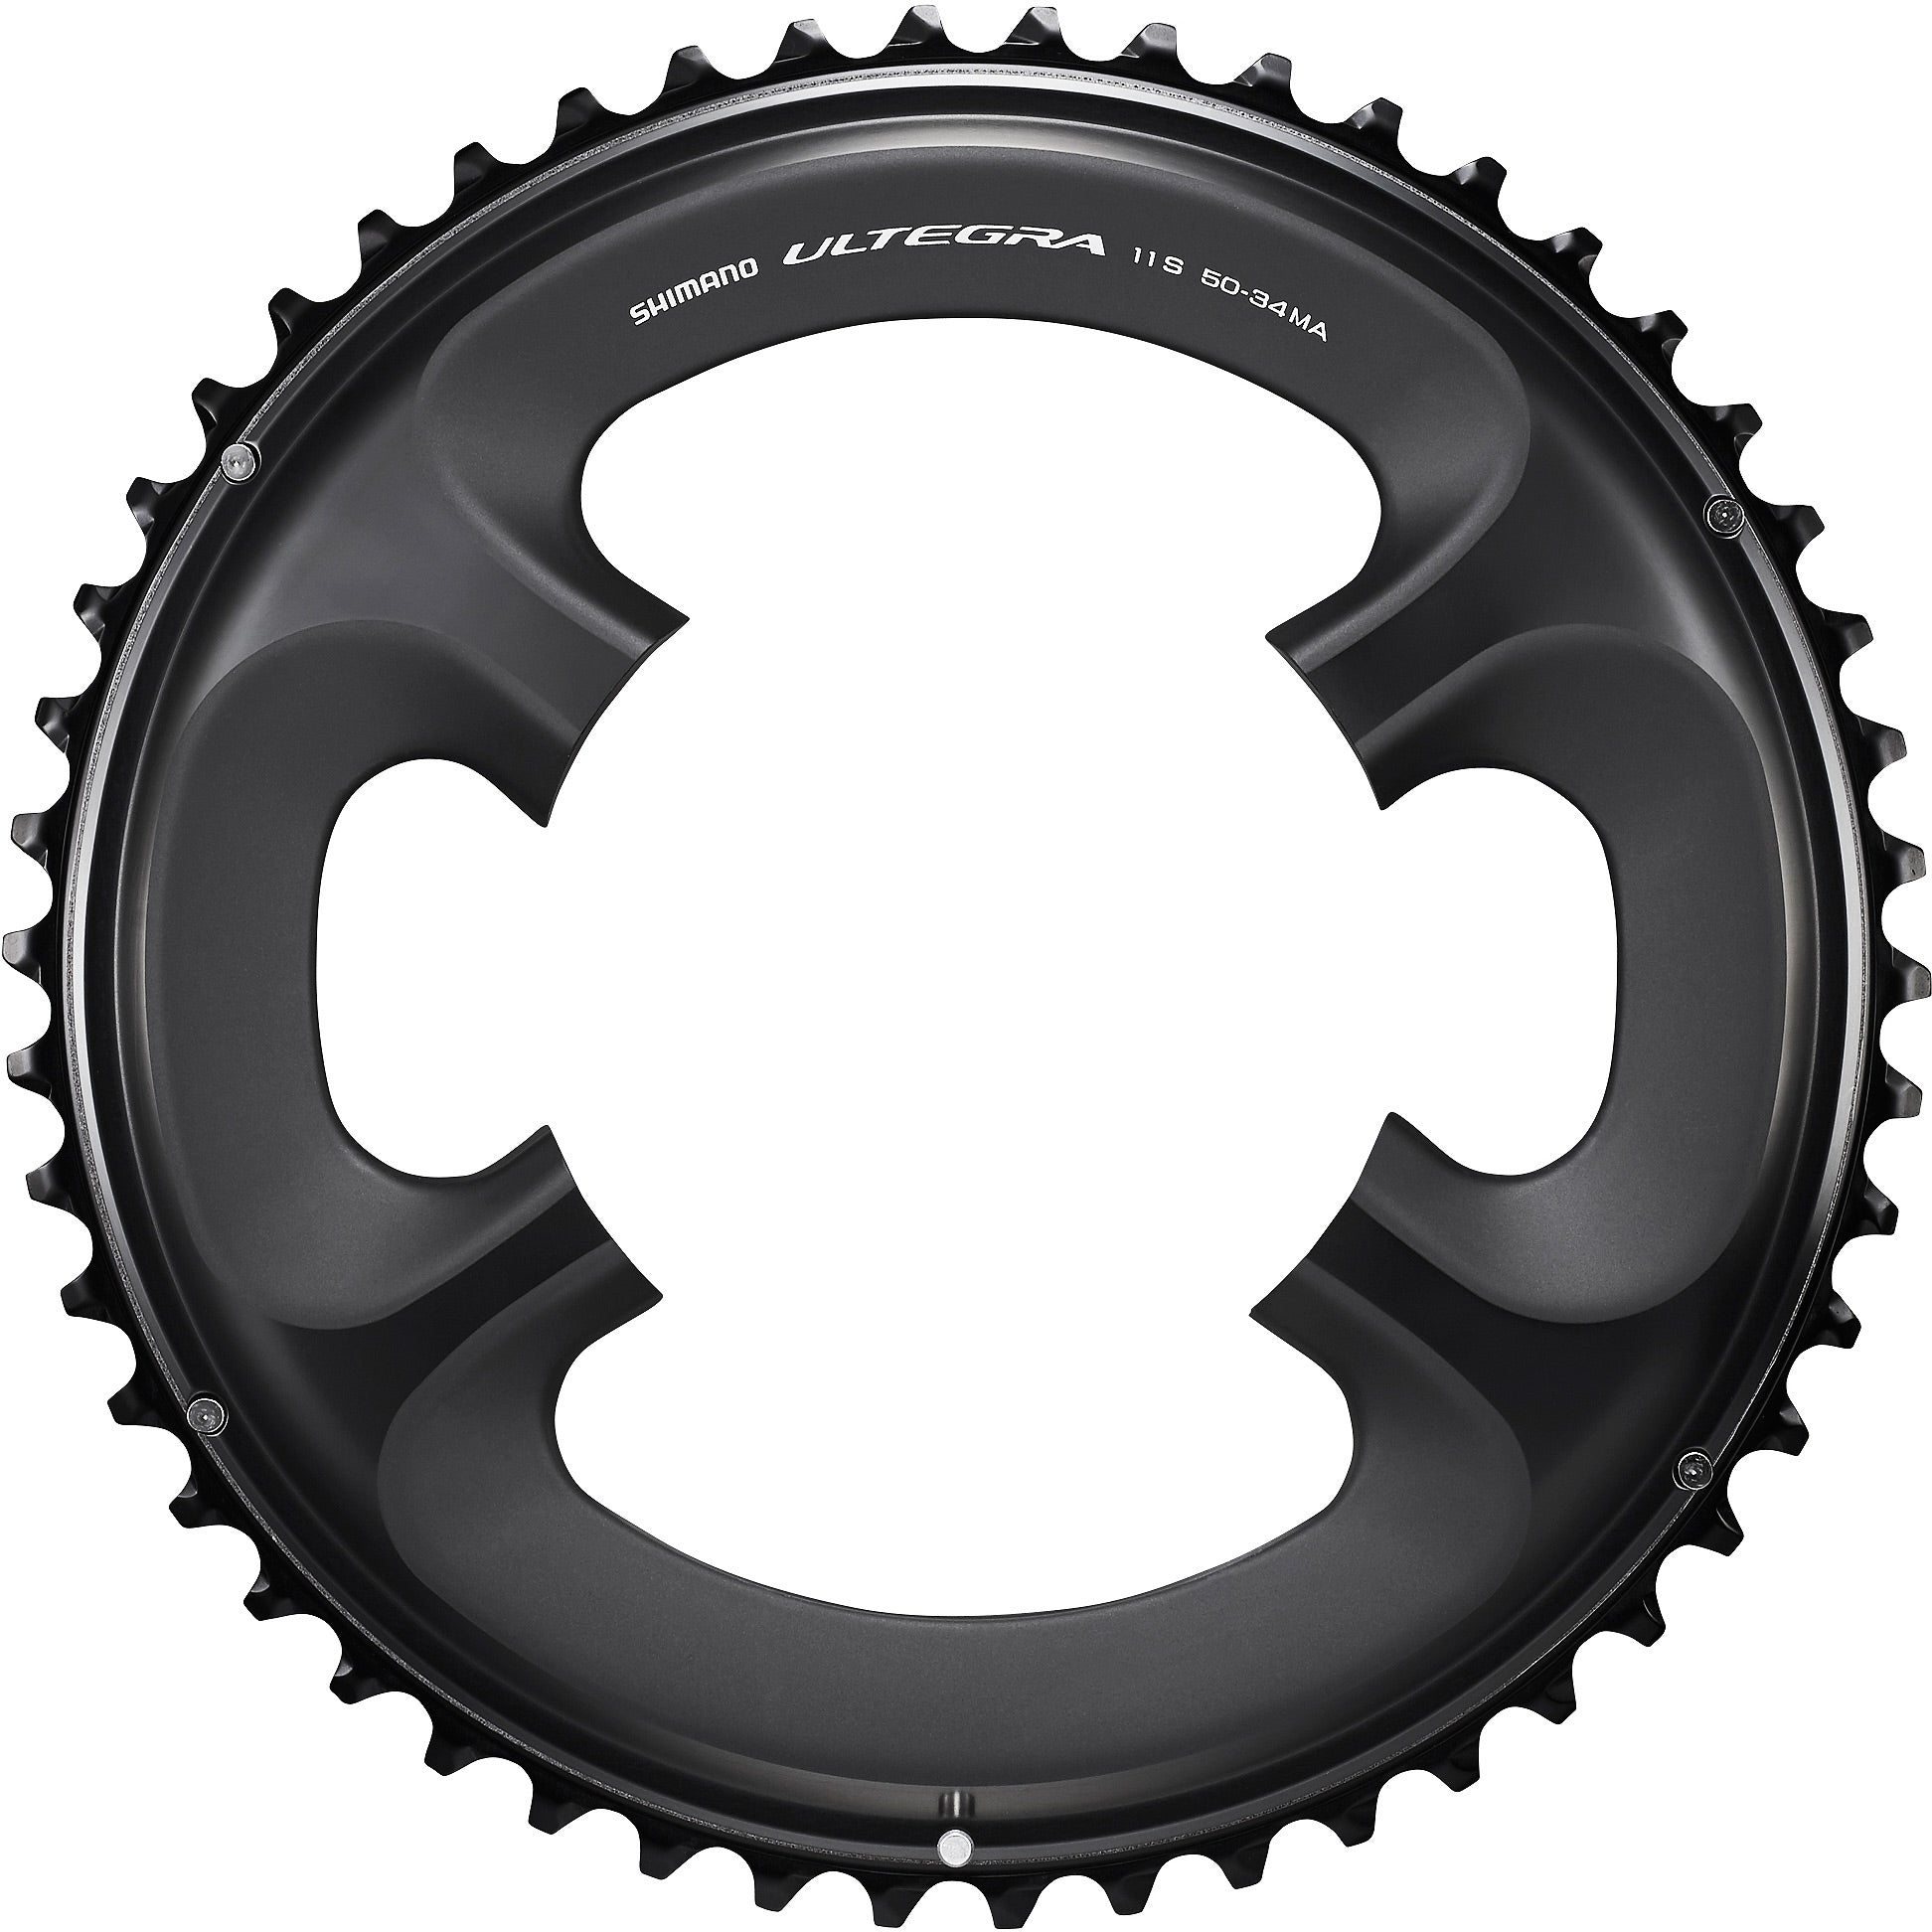 Shimano FC-6800 Chainring 52T-MB for 52-36T-Bicycle Chainrings-Shimano-Chain Driven Cycles-Bike Shop-Ireland